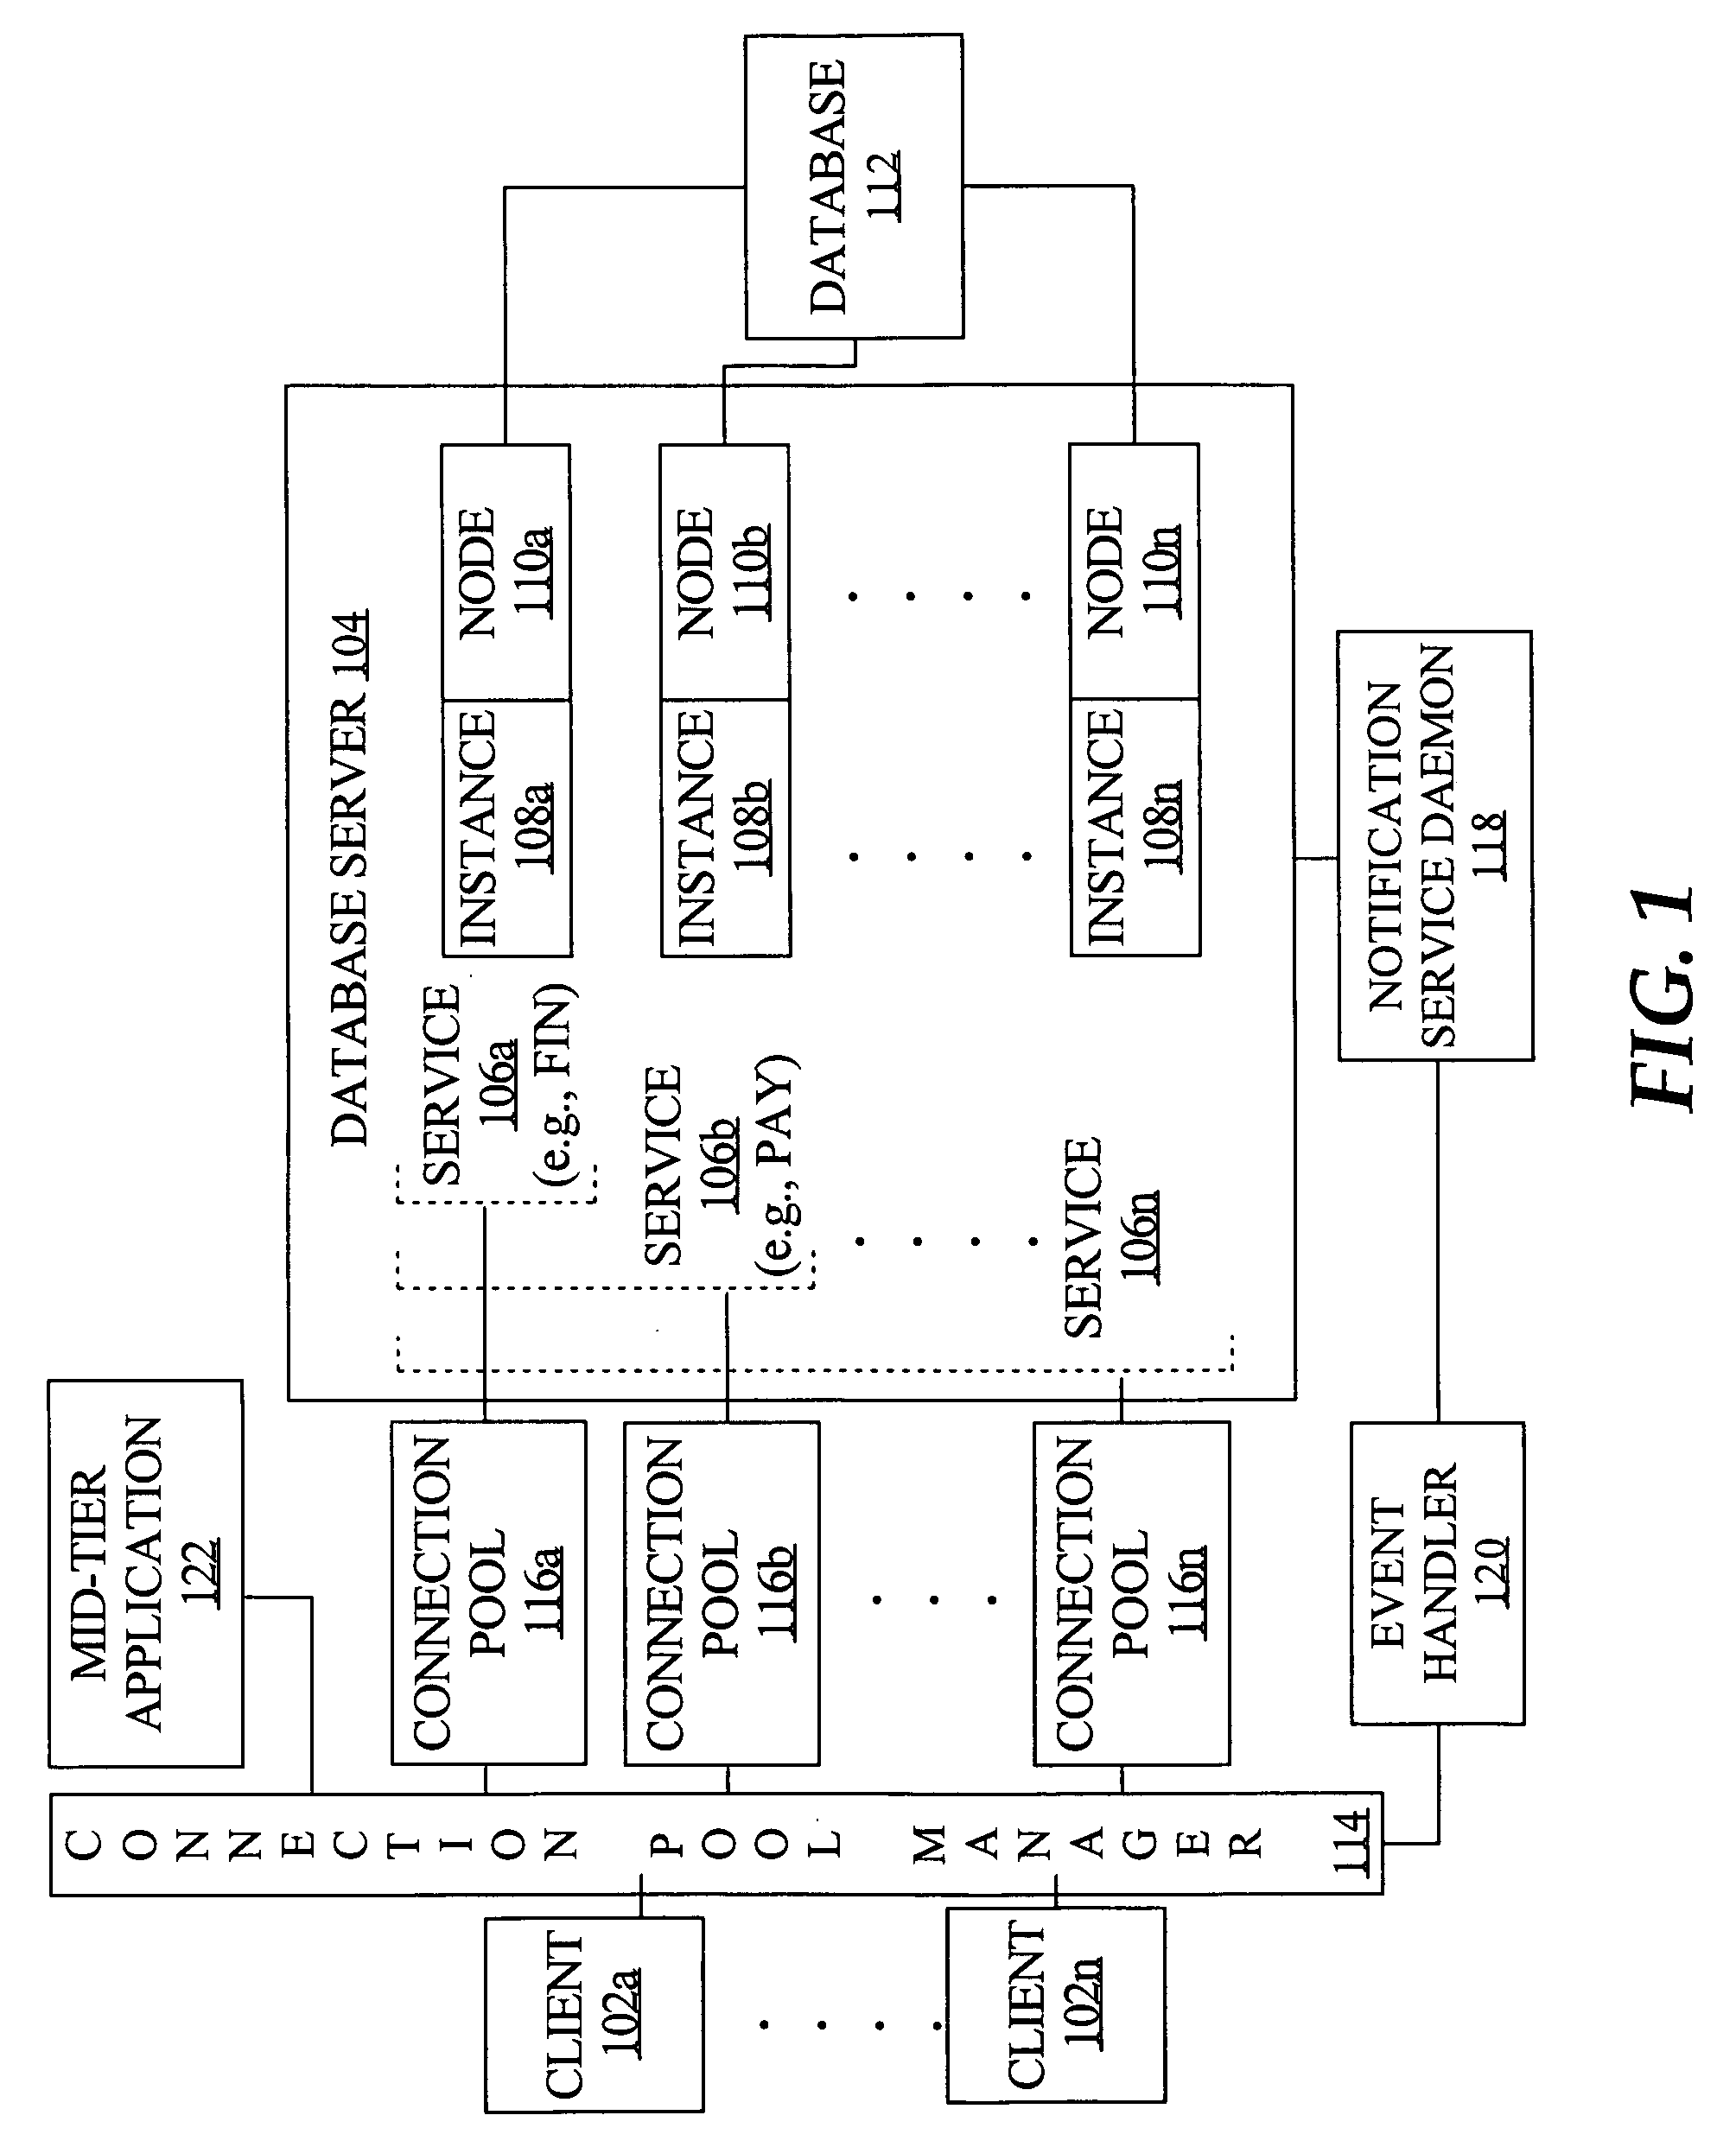 Fast reorganization of connections in response to an event in a clustered computing system